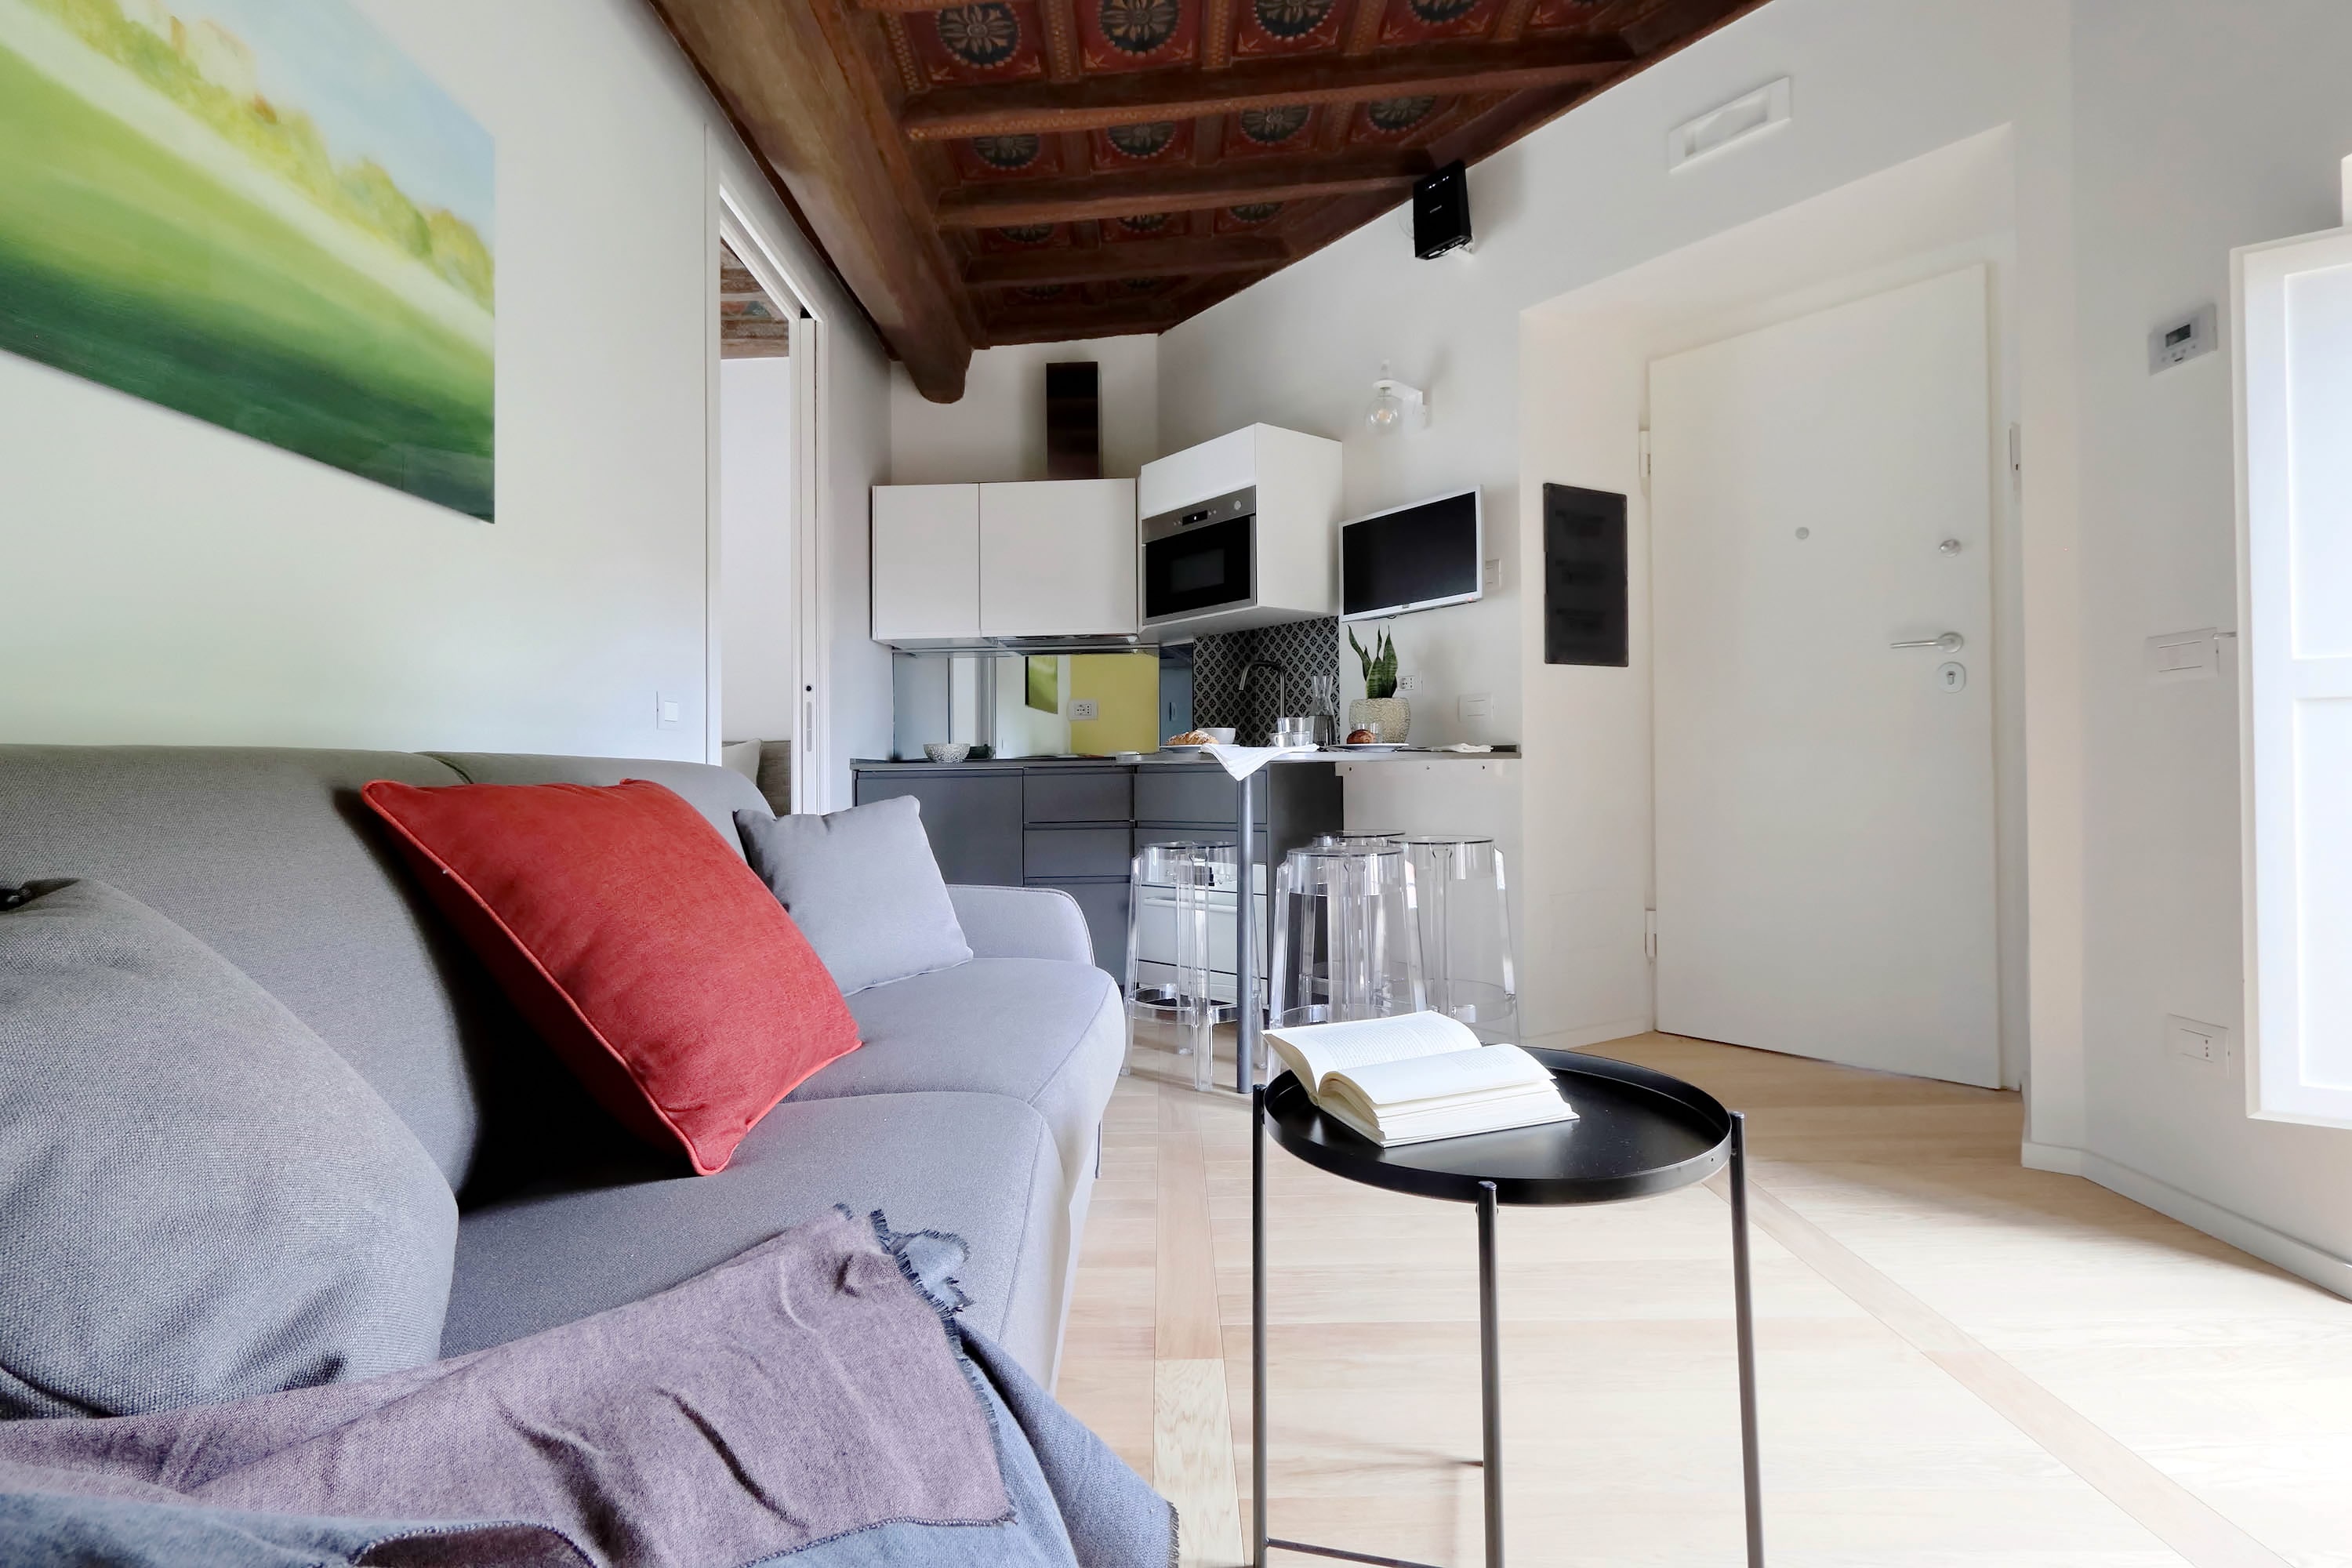 Property Image 2 - Amazing Modern Apartment in the Heart of Trastevere